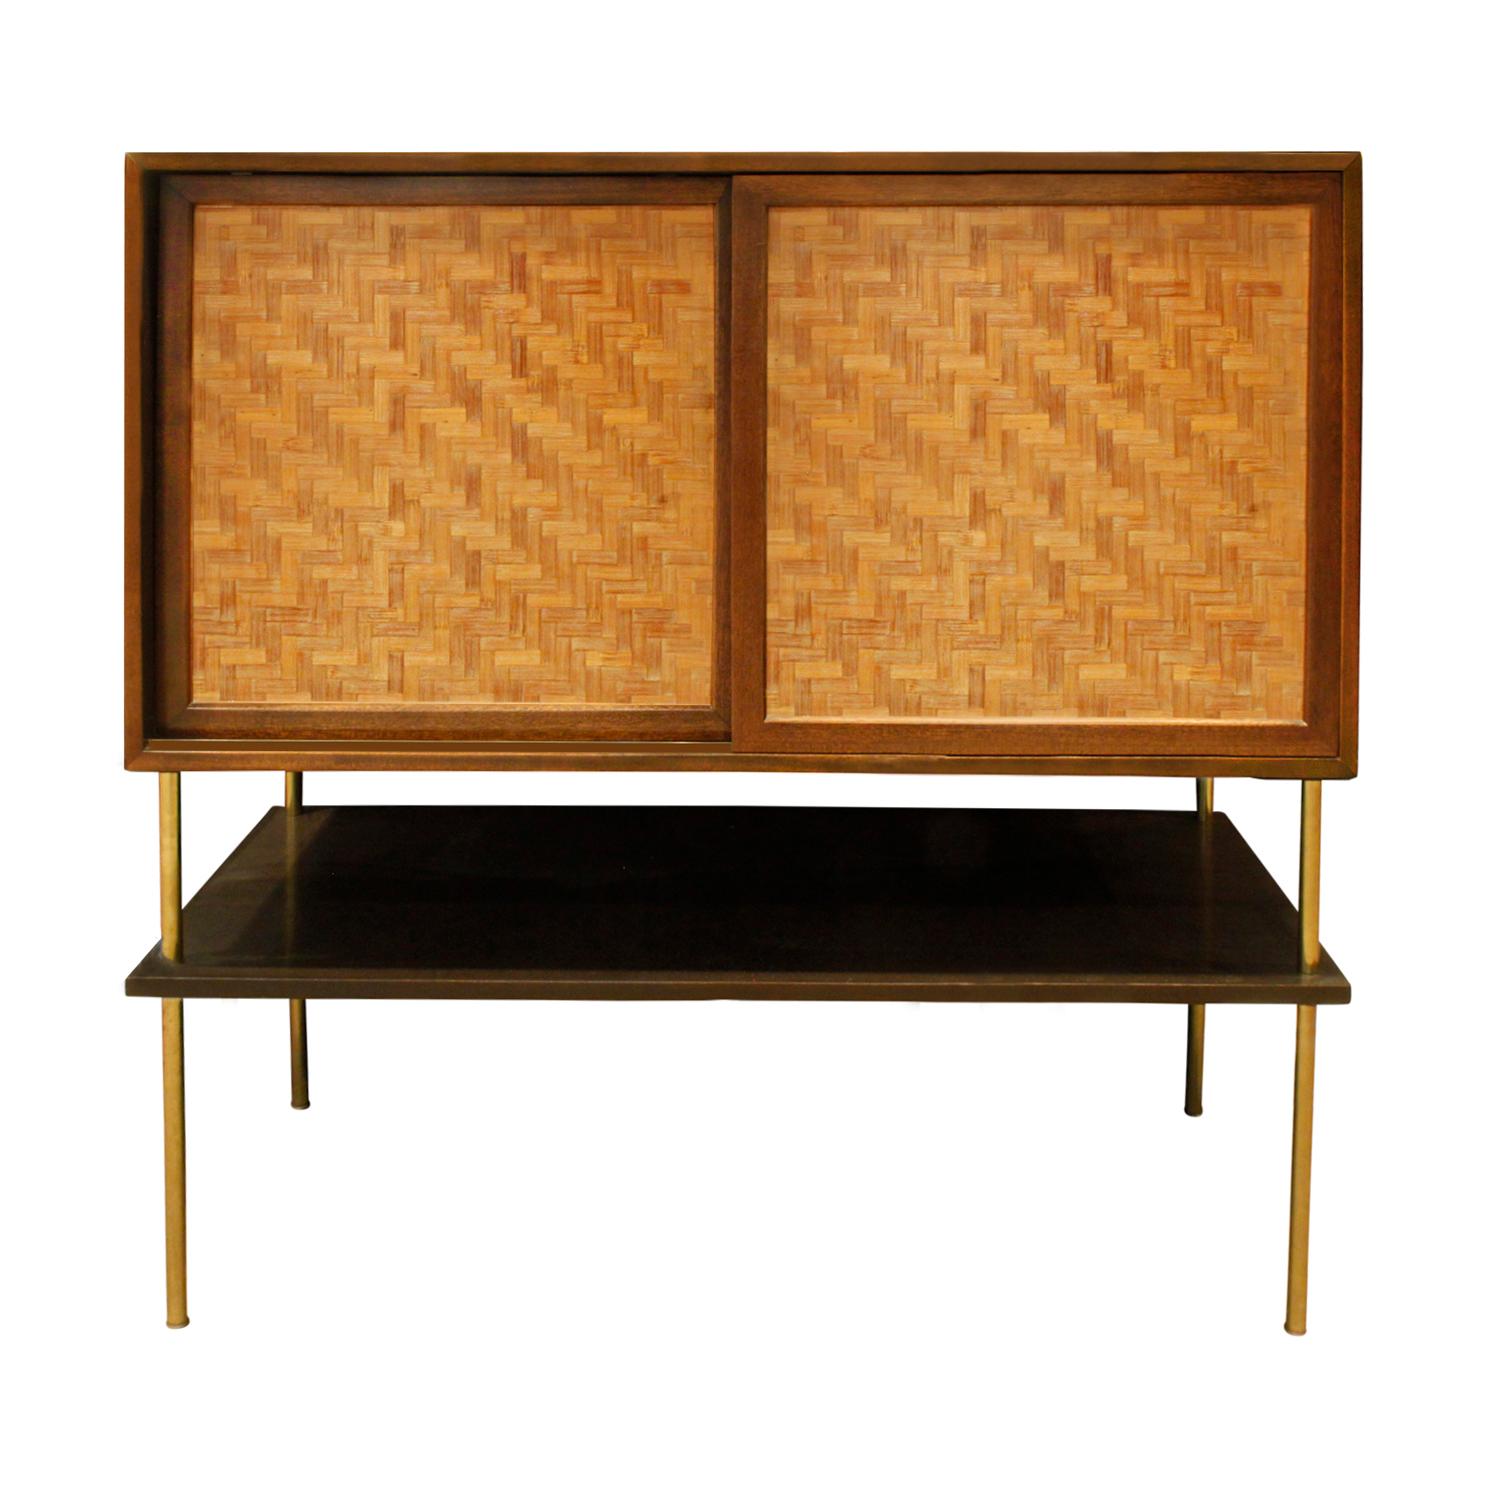 Raised cabinet in mahogany with inset caned doors on brass legs with lower shelf by Harvey Probber, American 1950's. Signed with metal label that reads “Designed by Harvey Probber” located on top interior drawer on right side. The drawers are